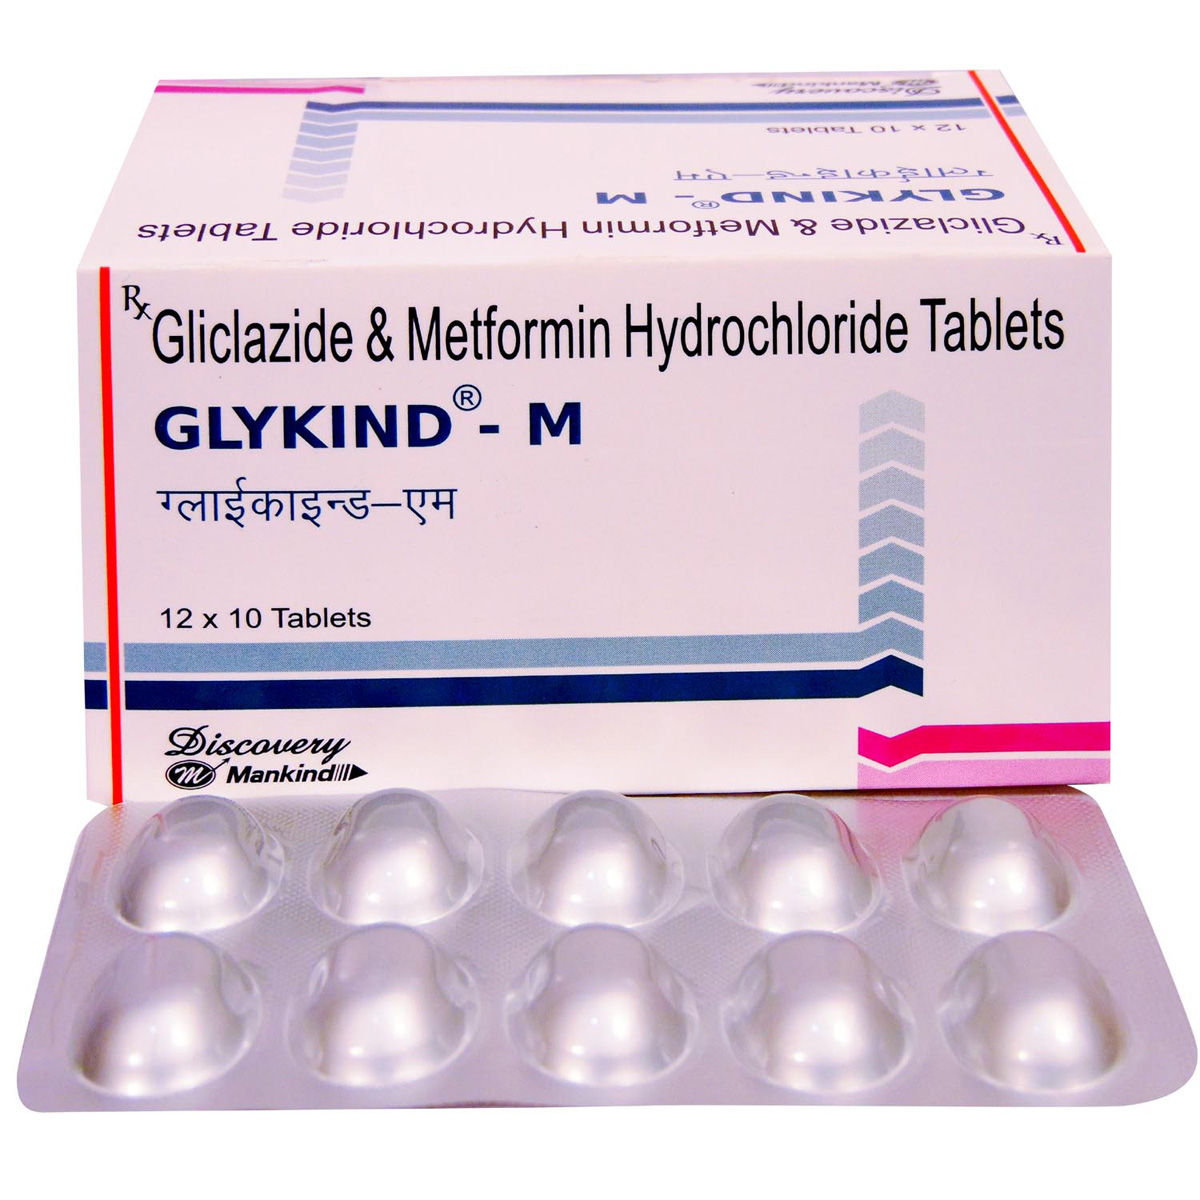 Glykind-M Tablet 10's Price, Uses, Side Effects, Composition ...